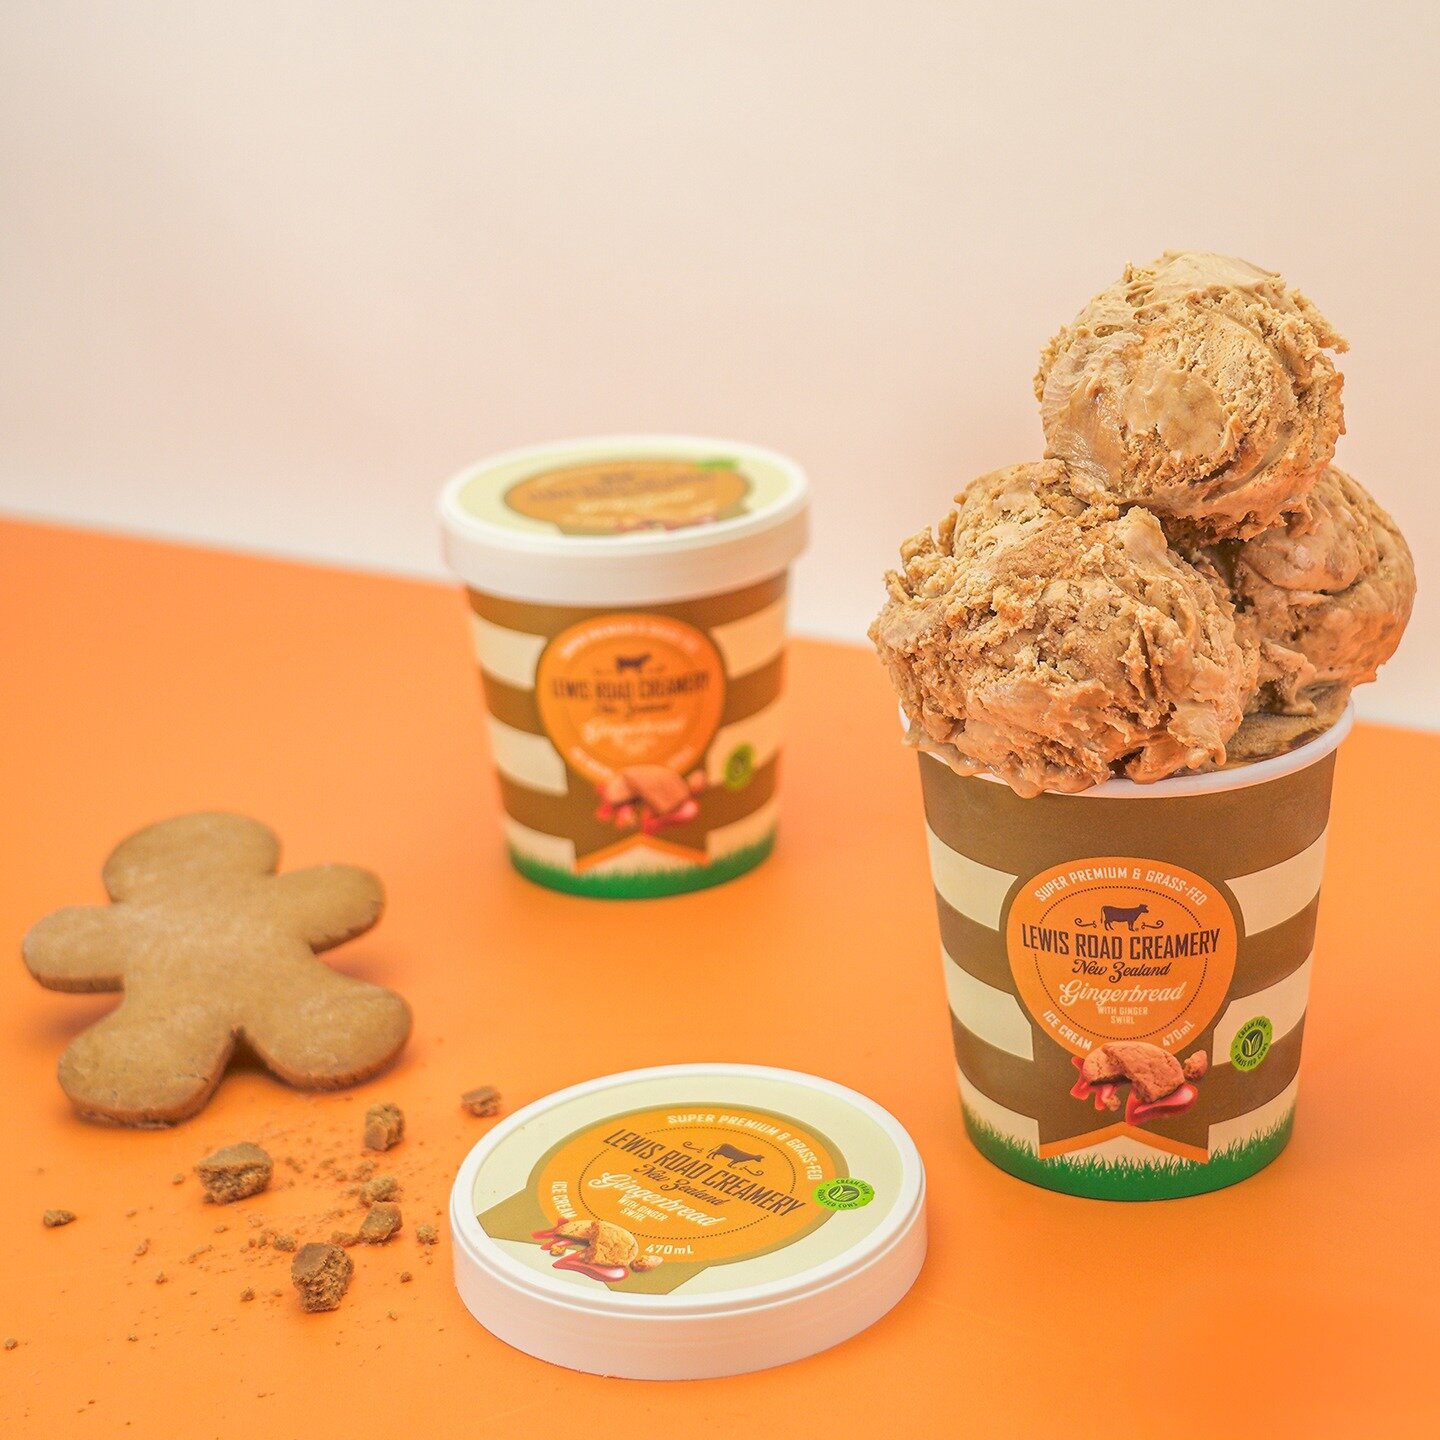 Joining the lineup of @lewisroadcreamery super premium ice creams is the new Gingerbread flavour &ndash; perfect for Christmas! Made with the finest ingredients, this delectable treat features a velvety gingerbread-flavoured base, swirled with a ribb